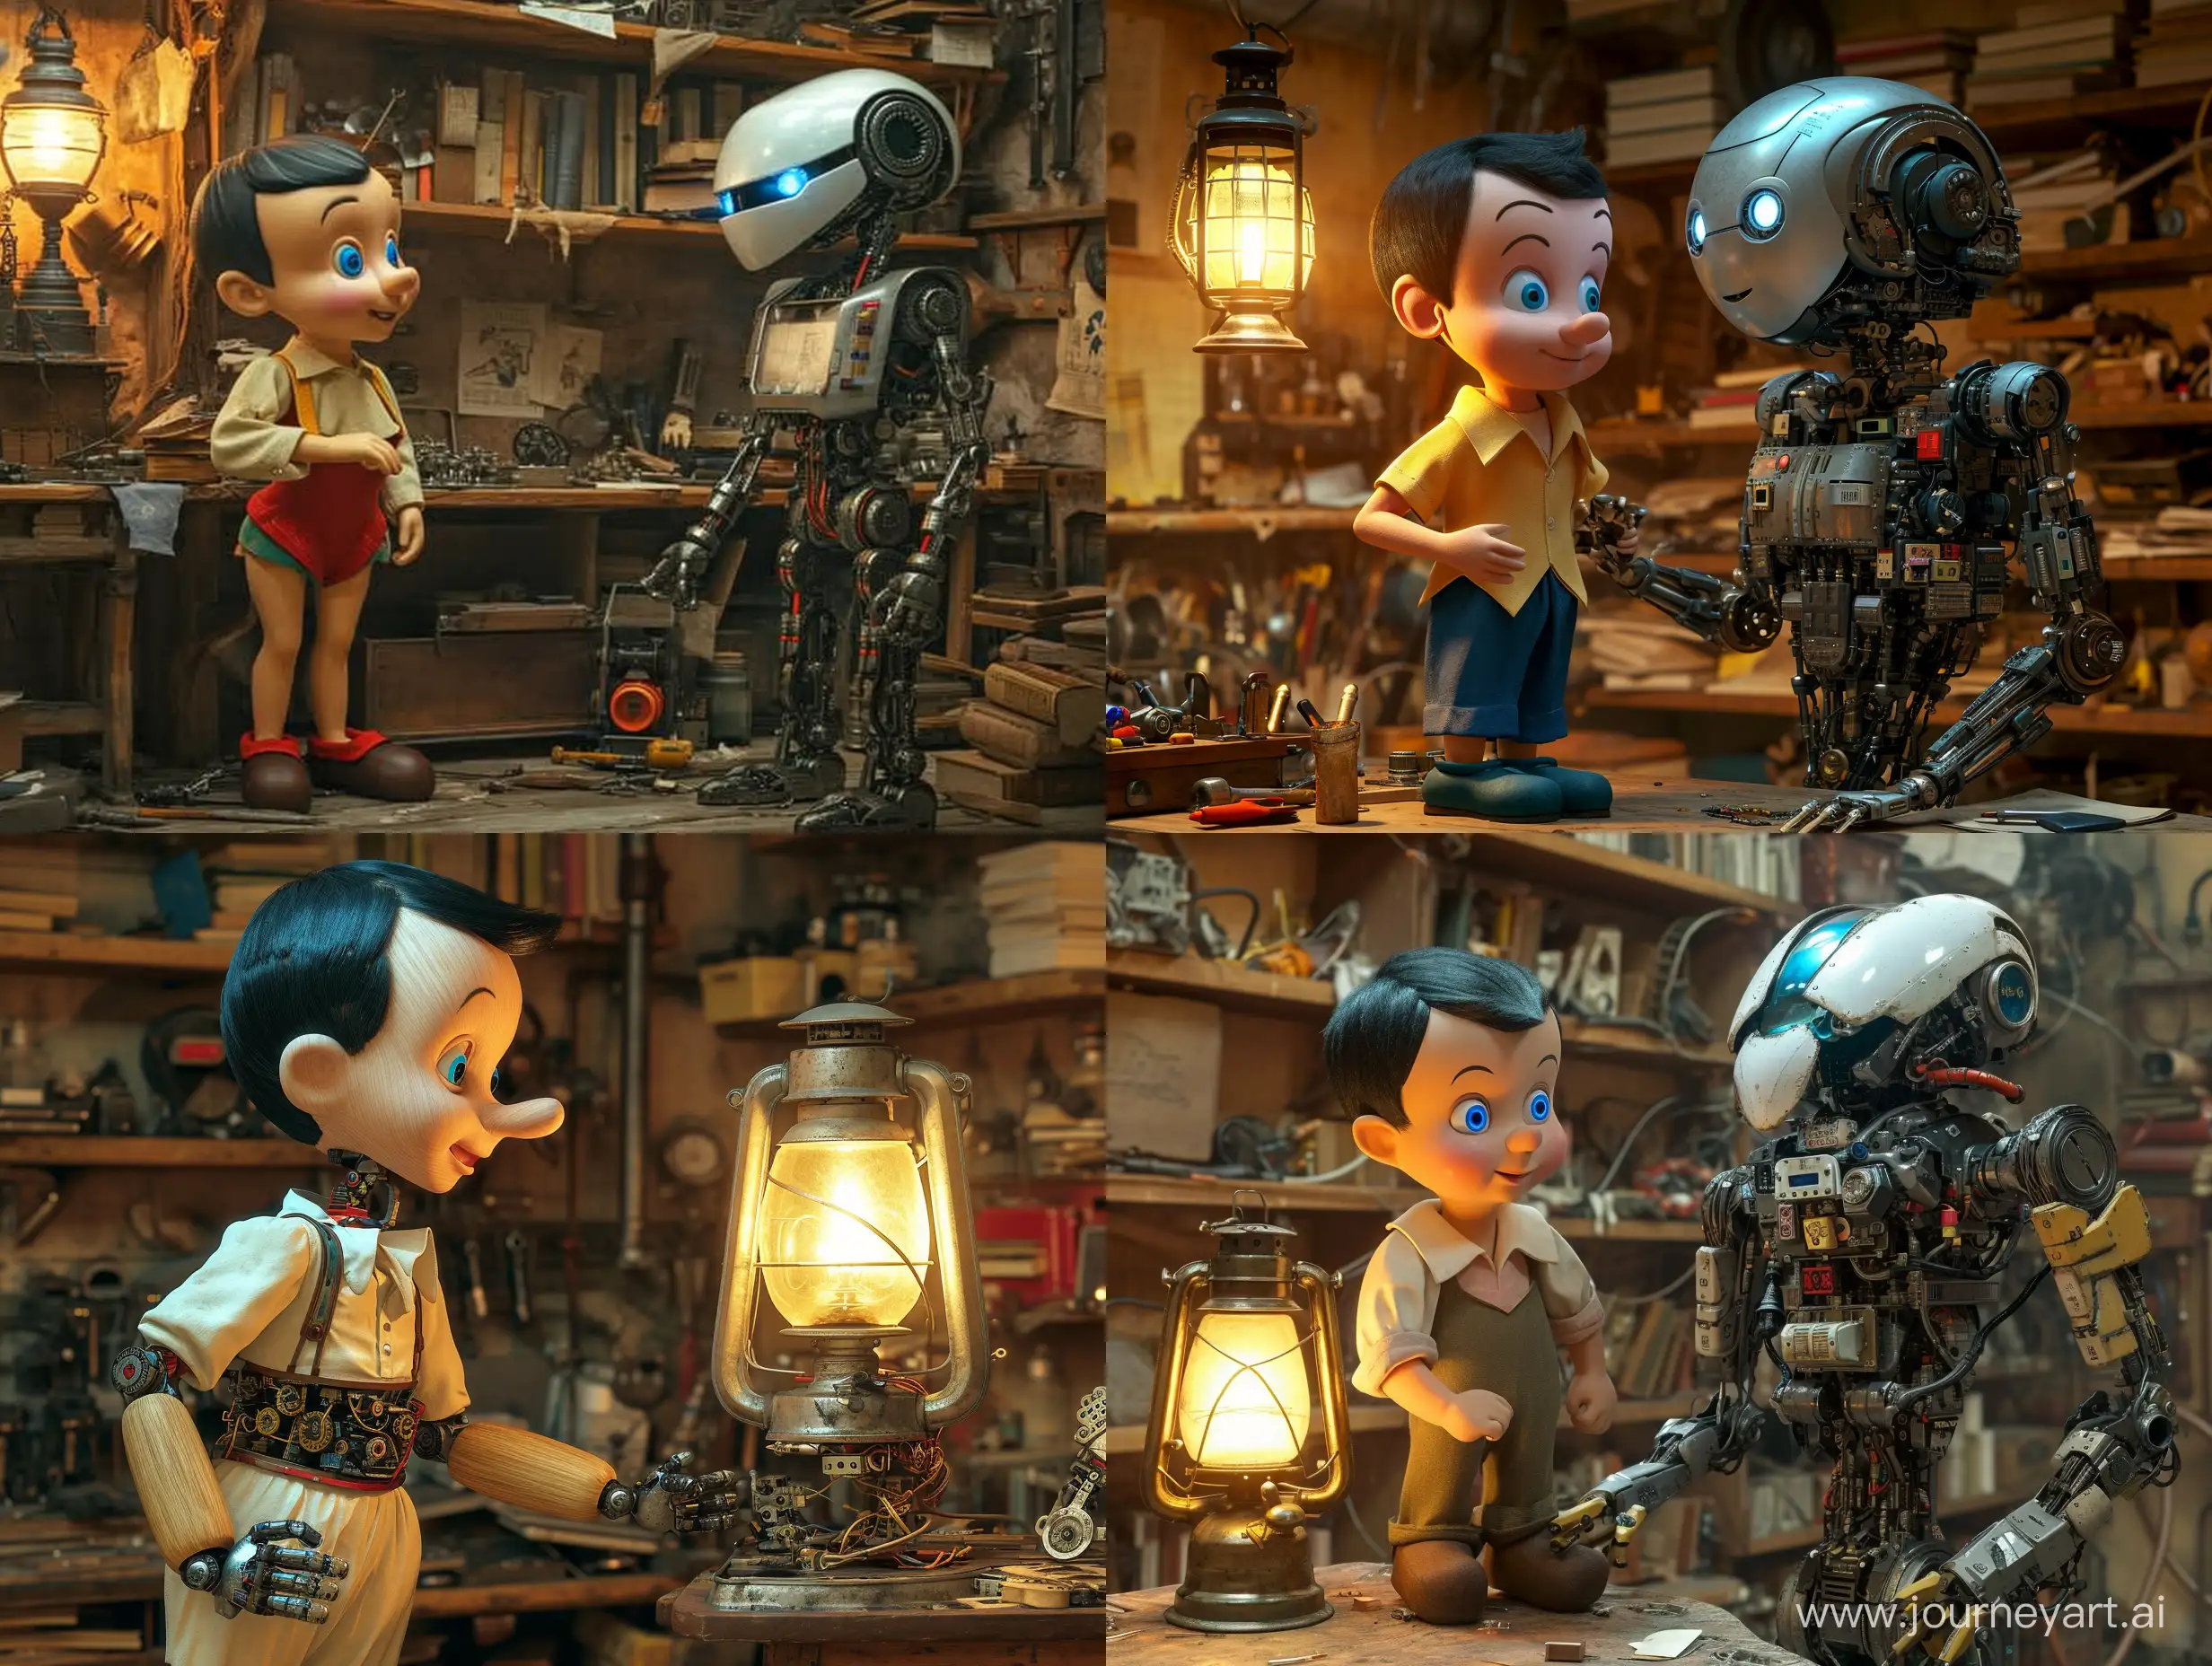 Imagine a photorealistic scene in a dimly lit, steampunk-inspired workshop. Pinocchio, with his bright blue eyes and cheerful smile, stands alongside an AI robot, its metallic body gleaming under the warm glow of a nearby lantern. Both figures are surrounded by an assortment of tools, gadgets, and machinery, hinting at the creative endeavors that have taken place within these walls.

Pinocchio, with his youthful exuberance, leans forward, his gaze fixed on the robot's intricate circuitry. His brow is furrowed in concentration as he attempts to decipher the complex workings of this mechanical marvel. The robot, its expression a blend of curiosity and amusement, tilts its head slightly, mirroring Pinocchio's attentiveness.

The air crackles with an electric energy, a testament to the harmonious connection between the young wooden puppet and the advanced AI. Their contrasting forms, Pinocchio's organic warmth contrasting with the robot's cold metallic exterior, speak to the power of friendship and the potential for understanding that transcends differences.

In the background, a series of shelves lined with books, blueprints, and sketches further suggests the creative spirit that permeates this space. These shelves stand as a testament to the countless hours spent exploring the boundless possibilities of technology and imagination.

The scene captures the essence of a timeless friendship, transcending age, material form, and the boundaries of human ingenuity. Pinocchio and the AI robot, their hands clasped together, represent the boundless potential for collaboration and connection that exists between humanity and technology. --s 600